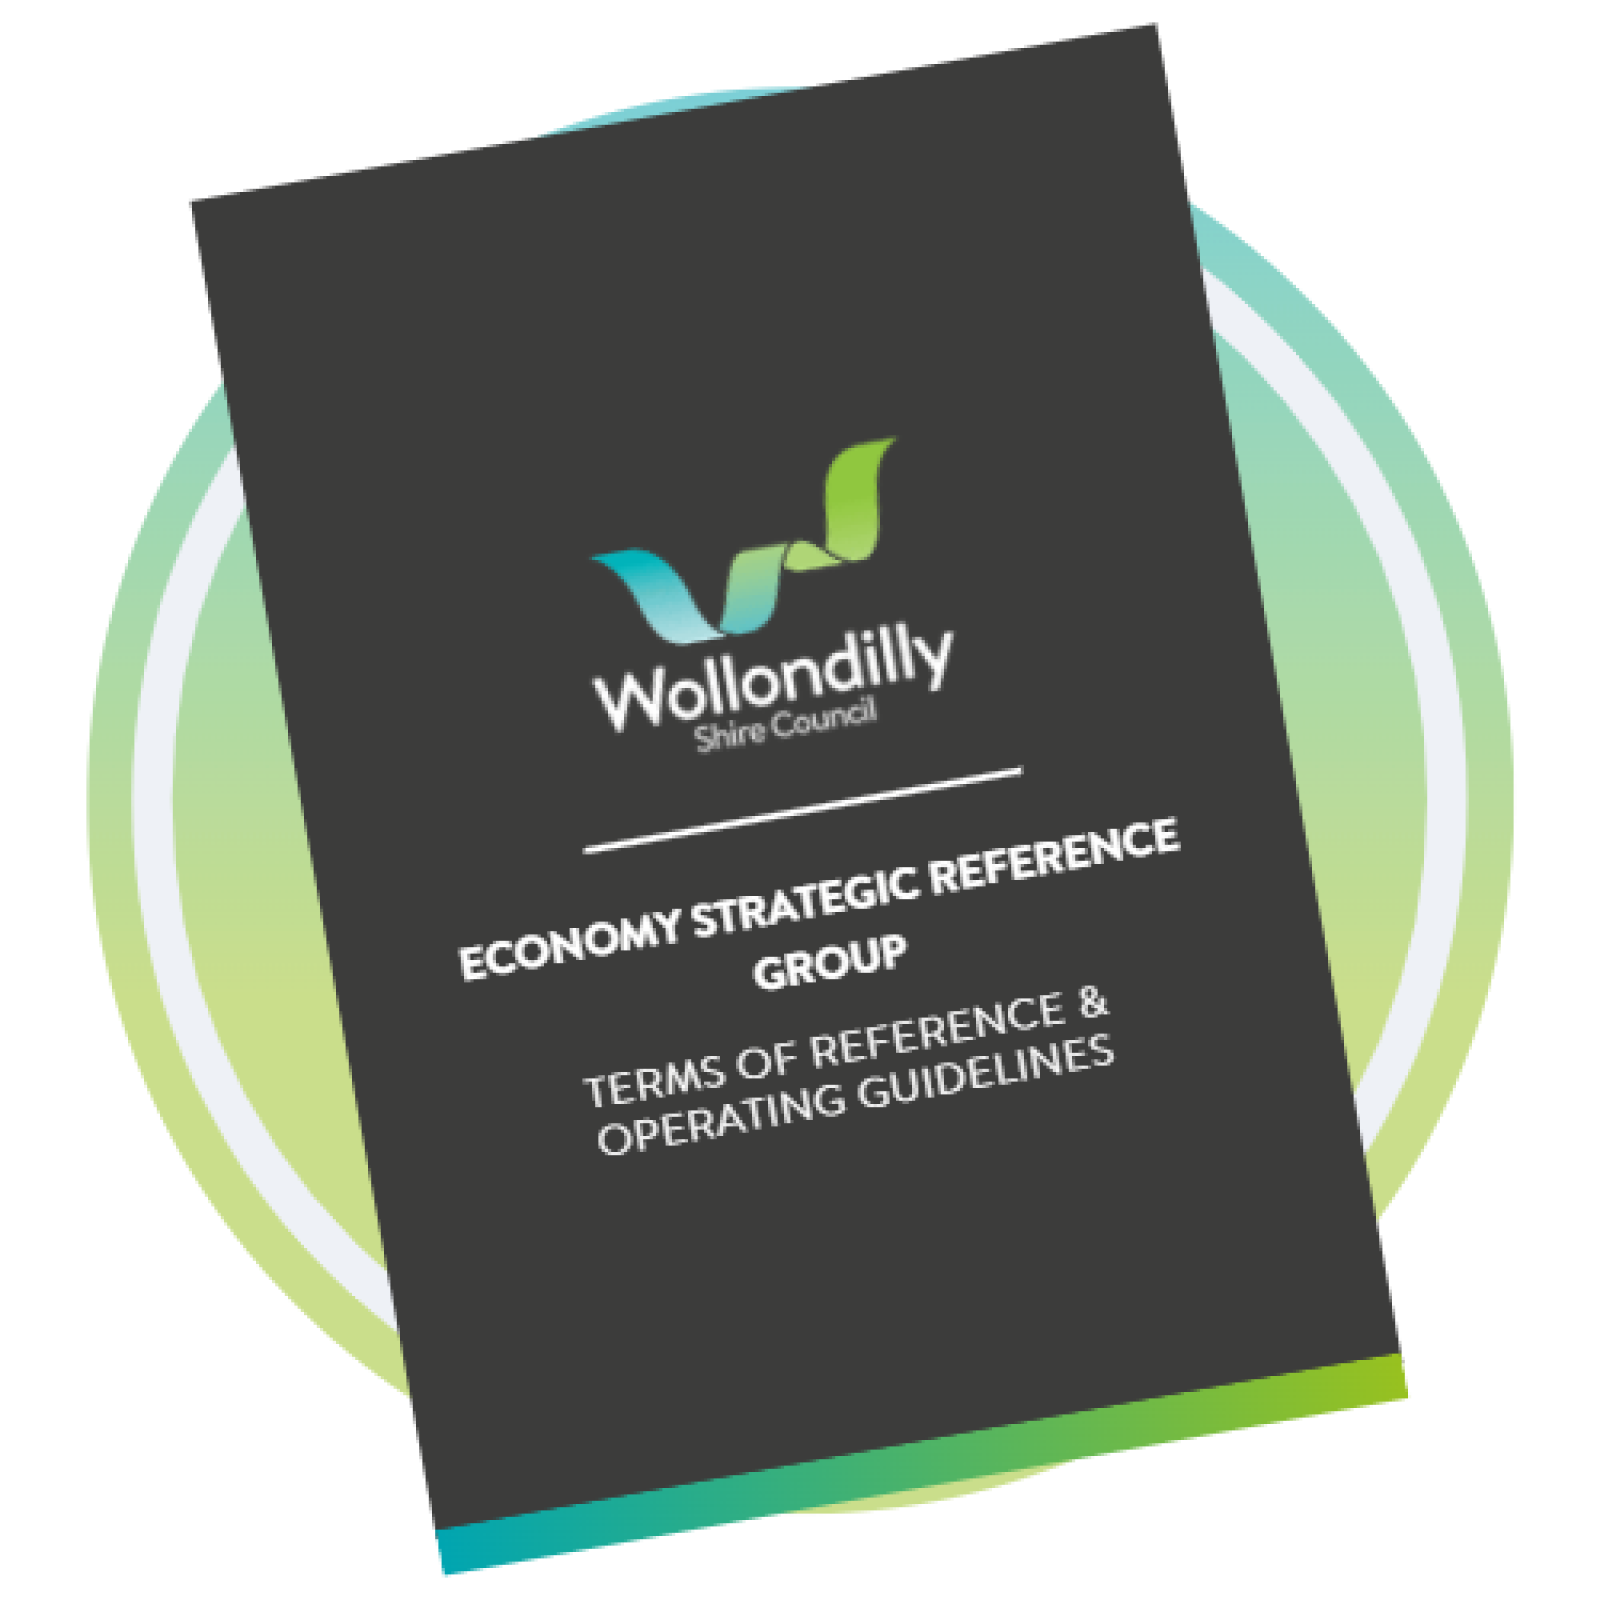 Economy Strategic Reference Group Terms of Reference Operating Guidelines Document Lockup